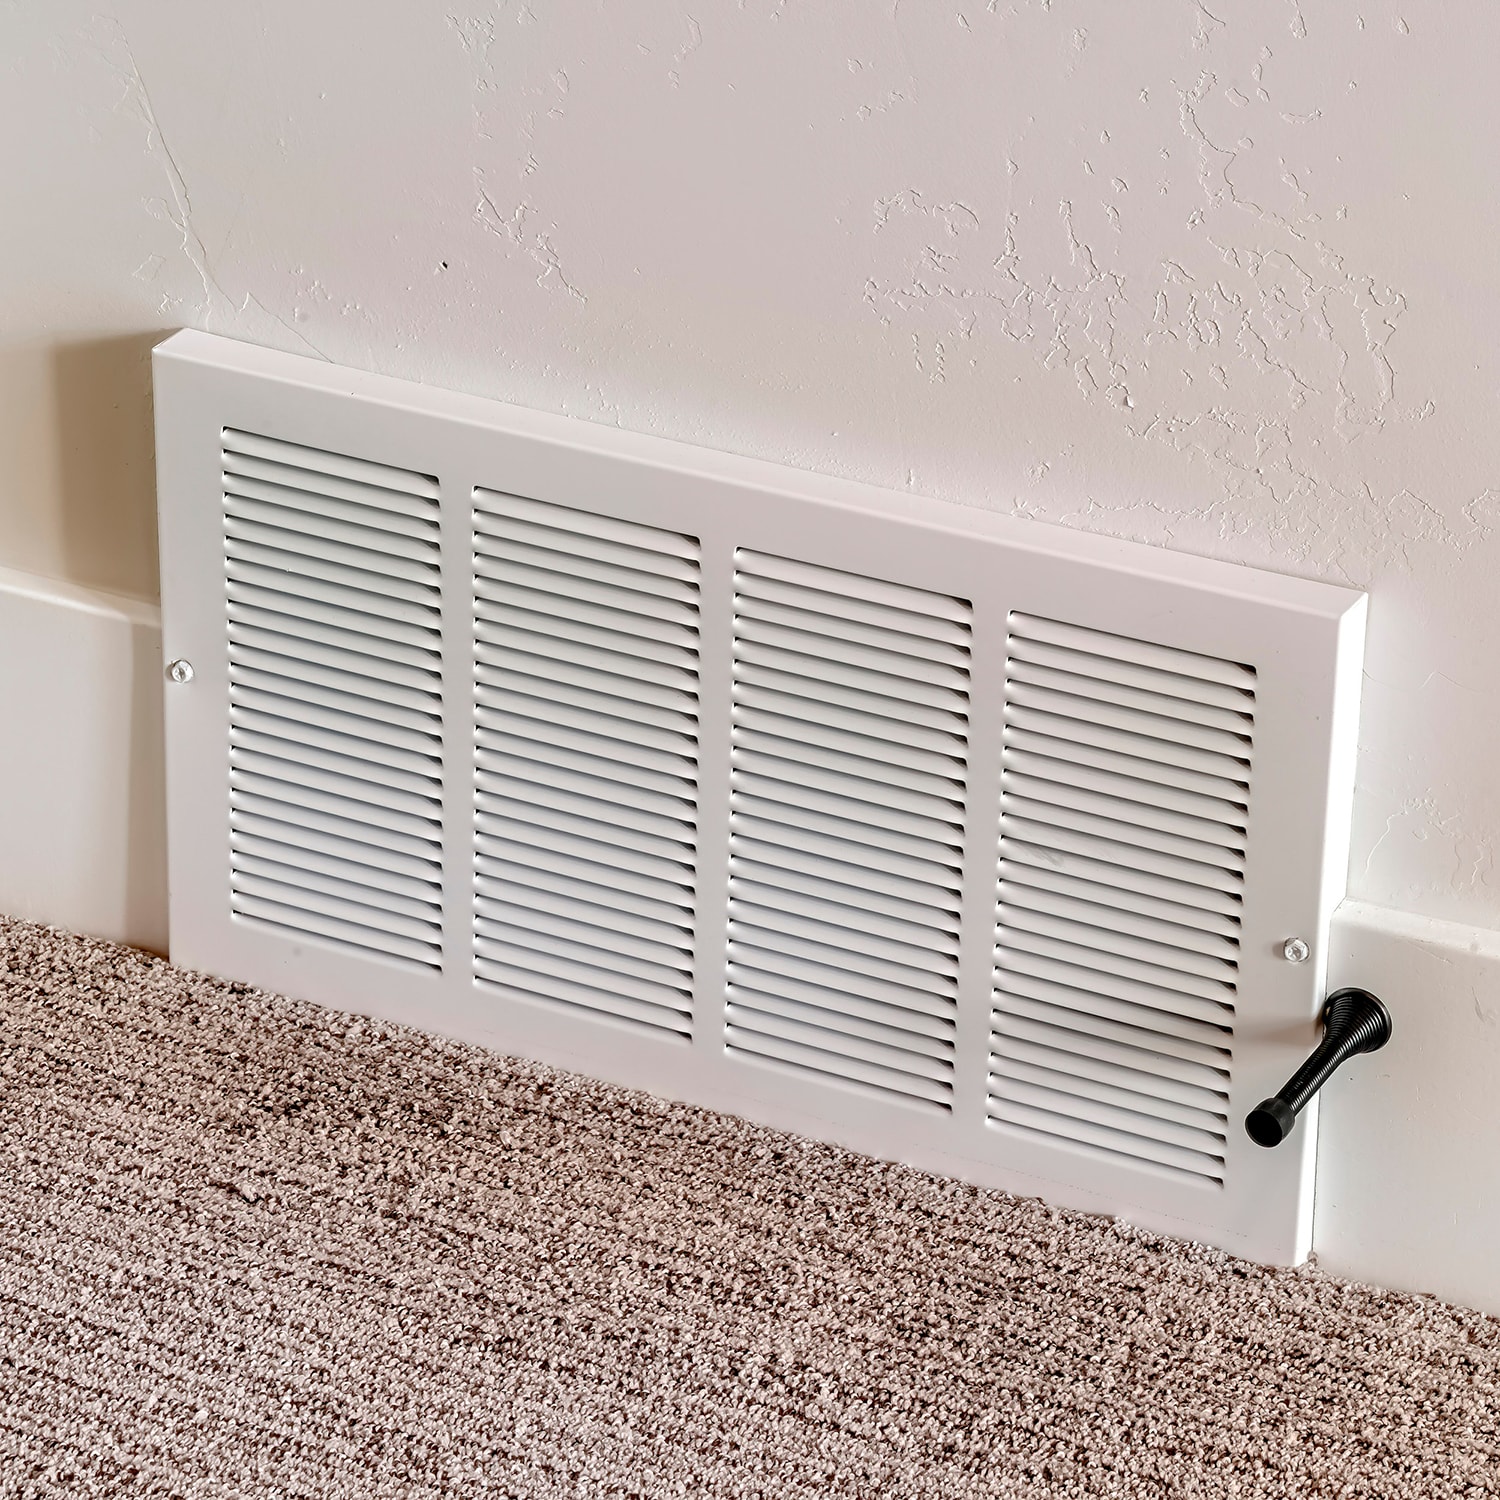 Square air conditioner white plastic grille cover against wall and carpet floor